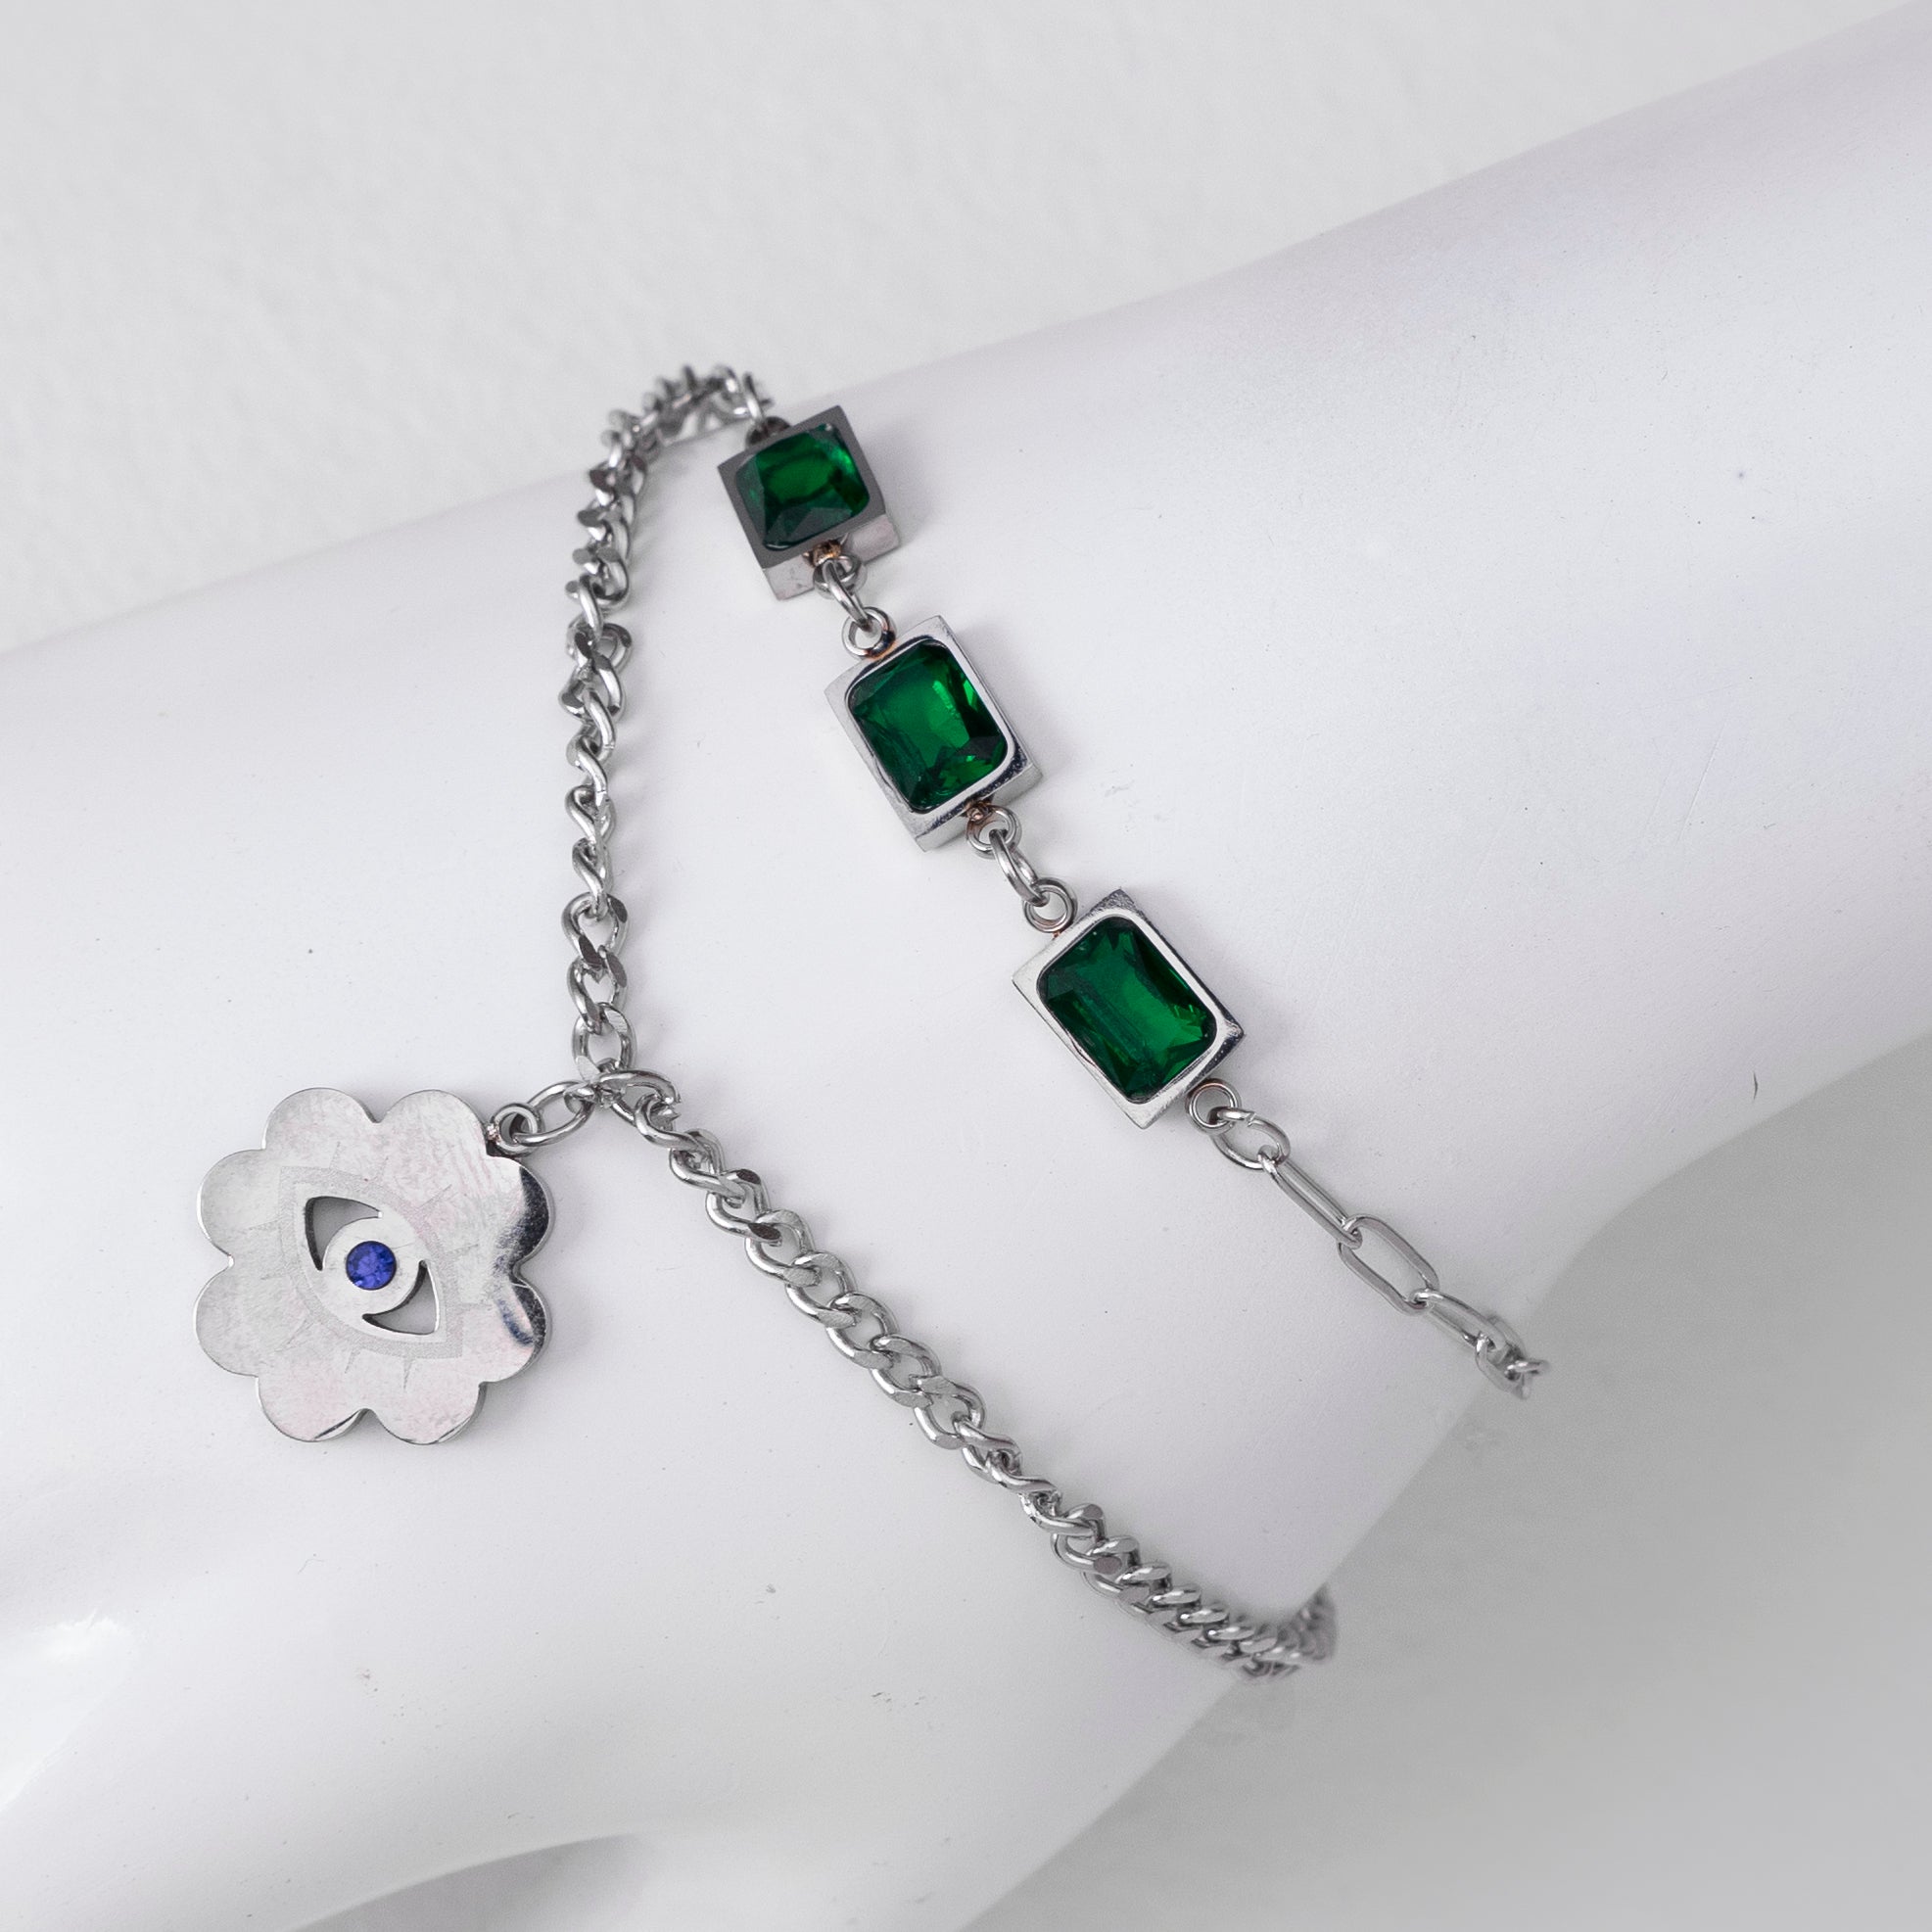 Buy brd jewelry 925 Sterling Silver Emerald Vine Bracelet I Leaf Bracelet I  Green Stone Bracelet I Silver Bracelet For Women and Girls at Amazon.in